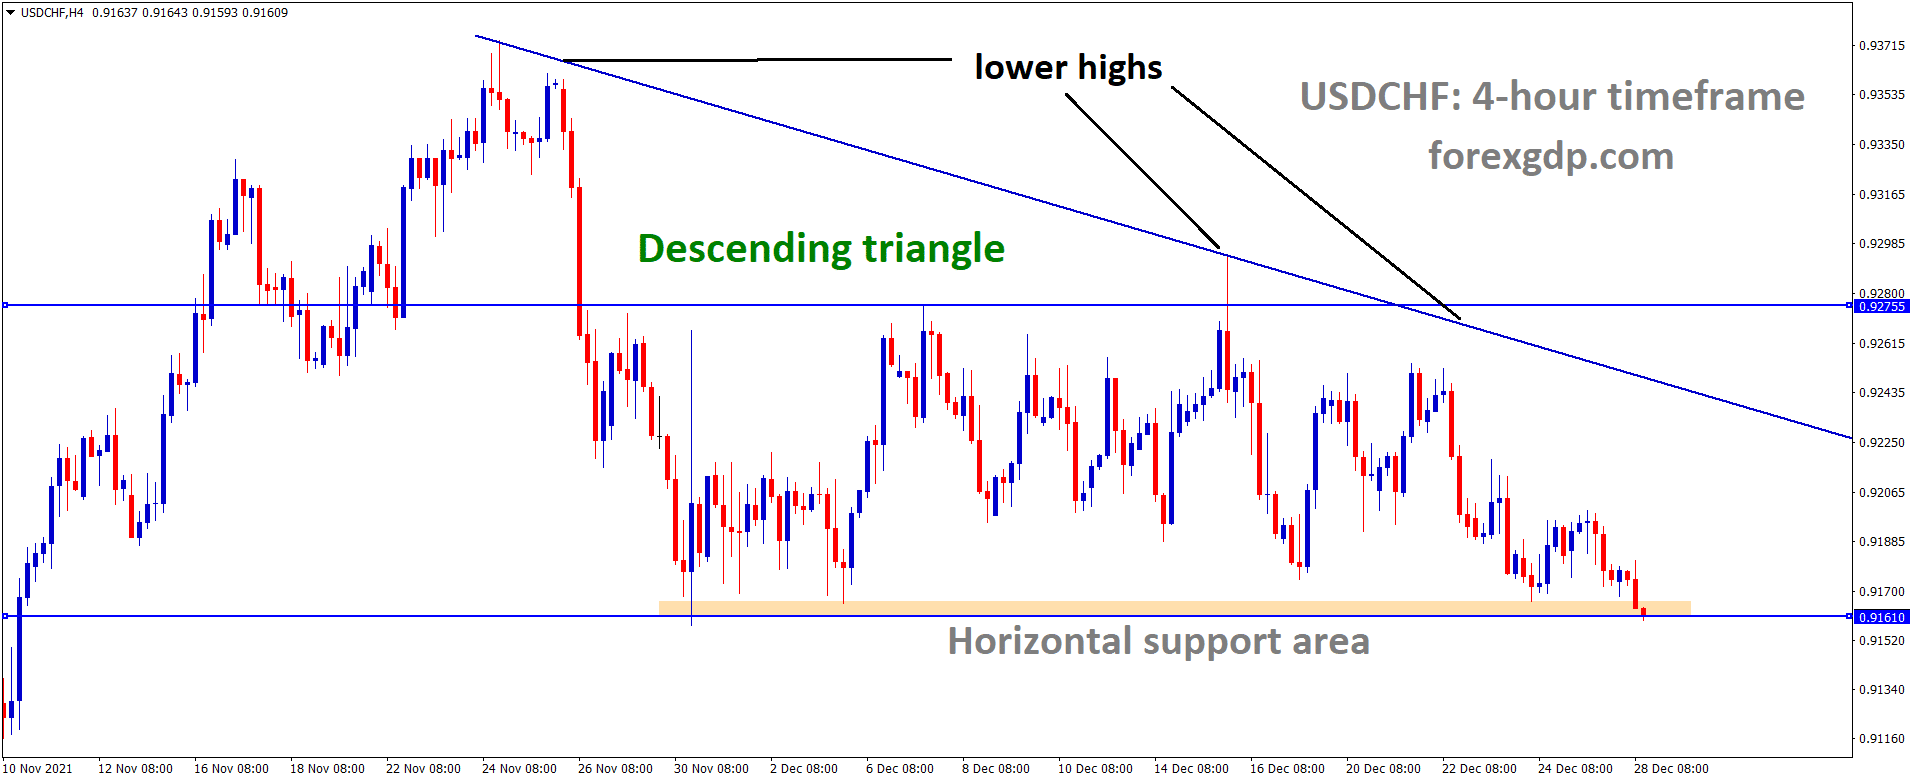 USDCHF is moving in the Descending triangle pattern and the market has reached the Horizontal support area of the triangle pattern 1